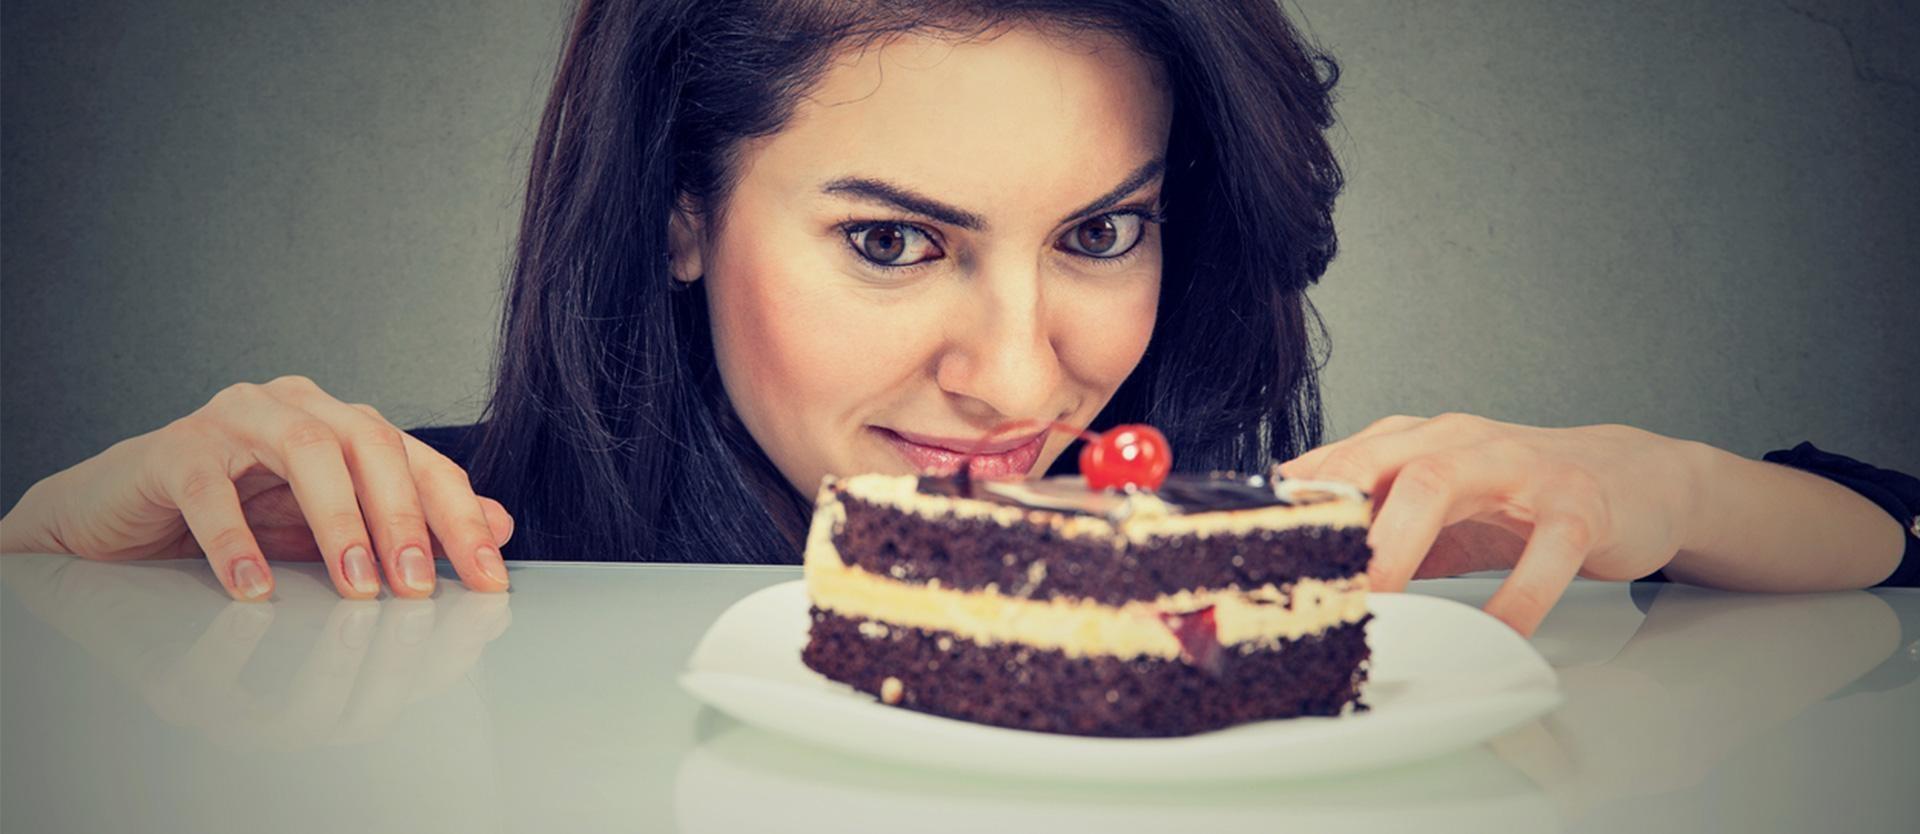 Can Too Much Sugar in Your Diet Cause Thinning Hair?